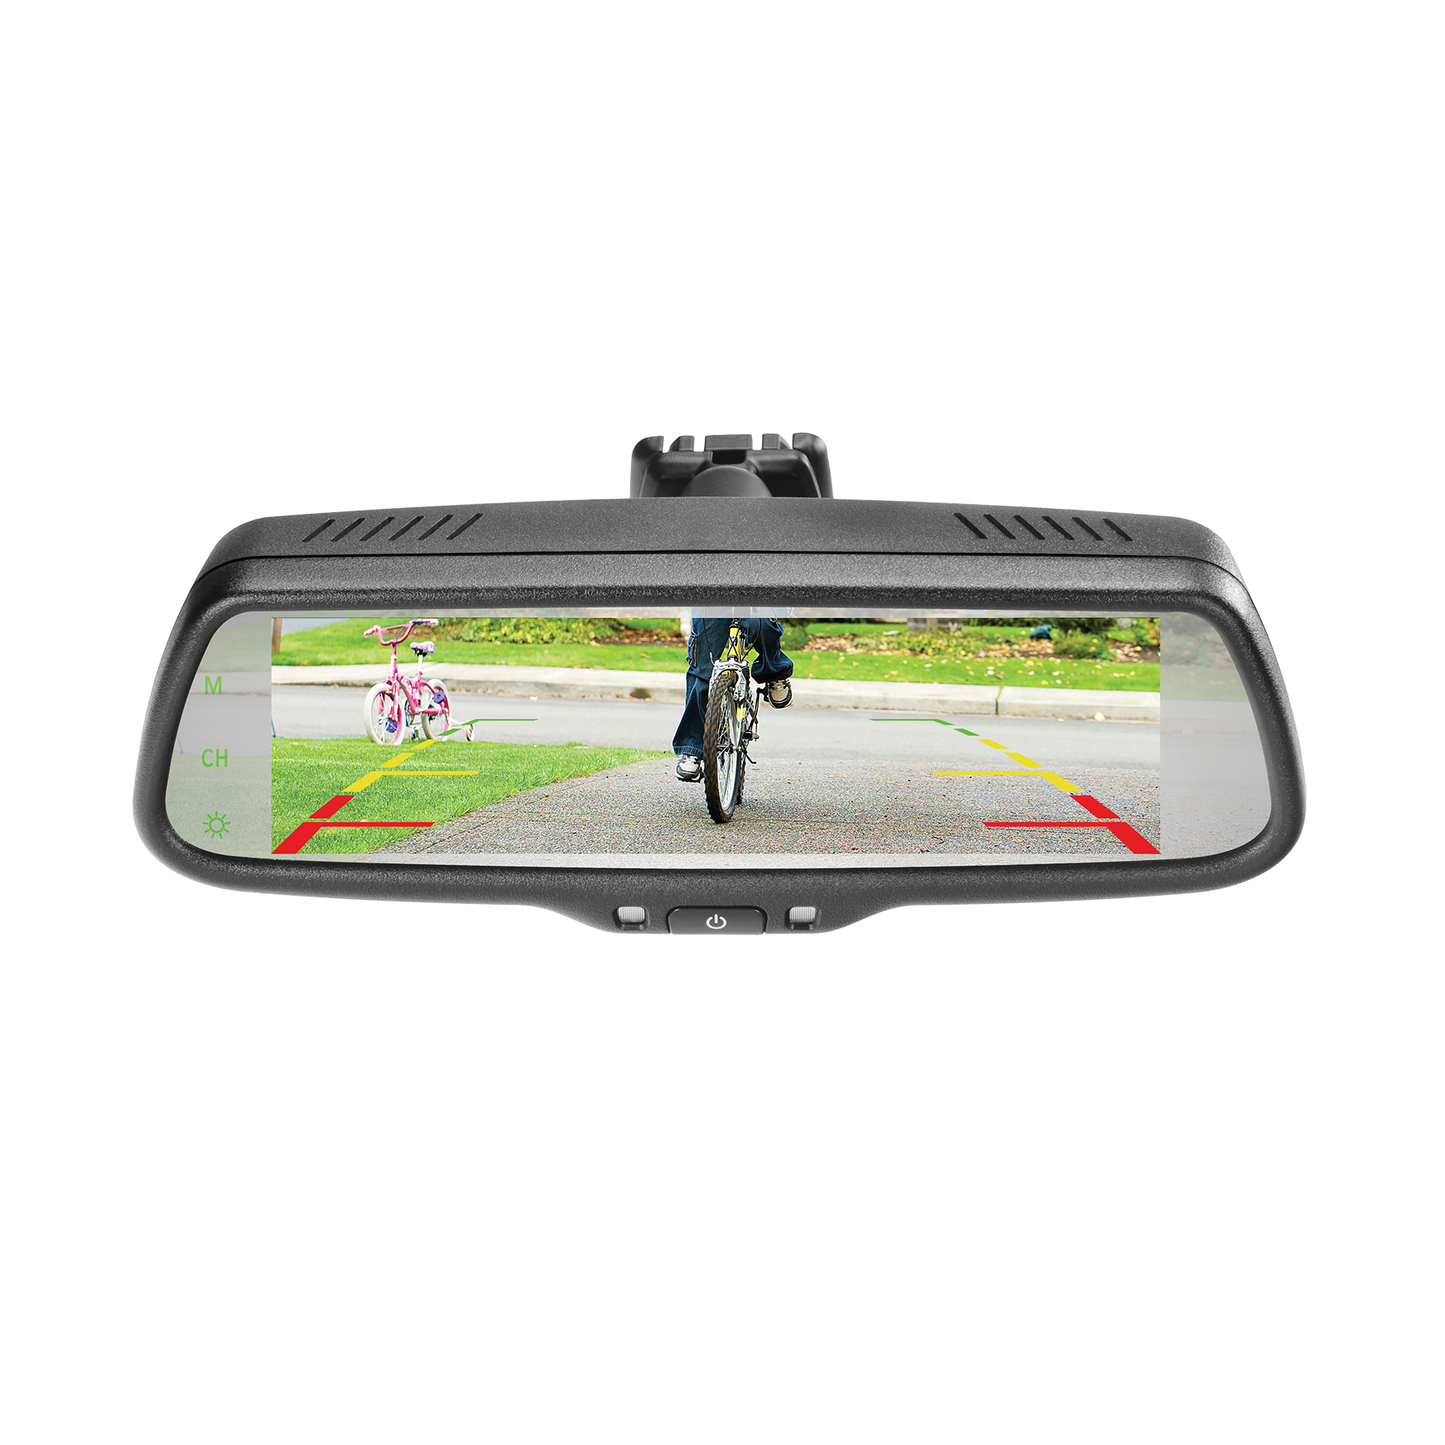 7.3” Car Rear View Mirror Monitor with removable bracket